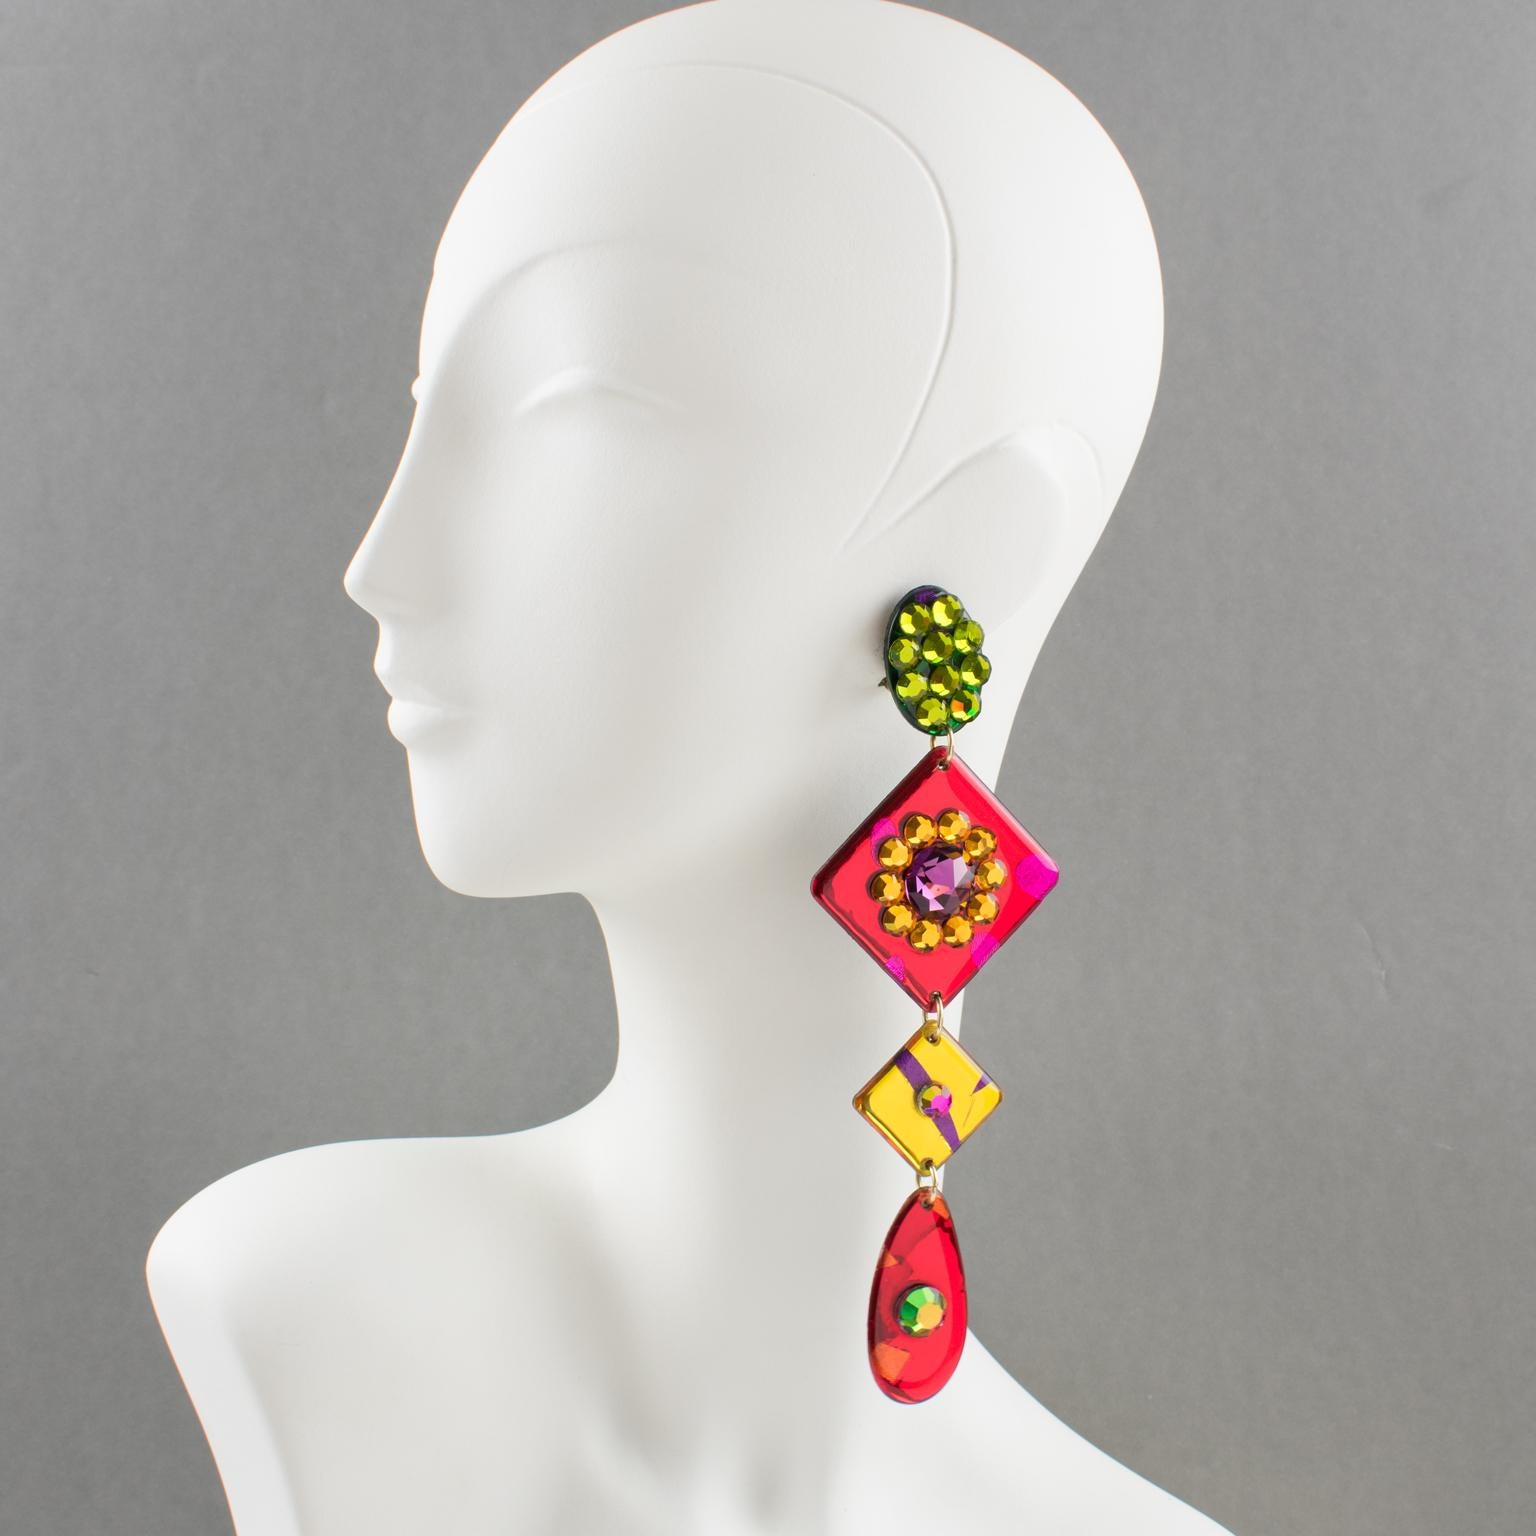 Do you think you have seen extra-long shoulder duster earrings? Well, check out these!
Spectacular Italian designer studio Lucite or Resin dangling clip-on earrings. The extra-long shoulder-duster design boasts a geometric shape with drop, oval,